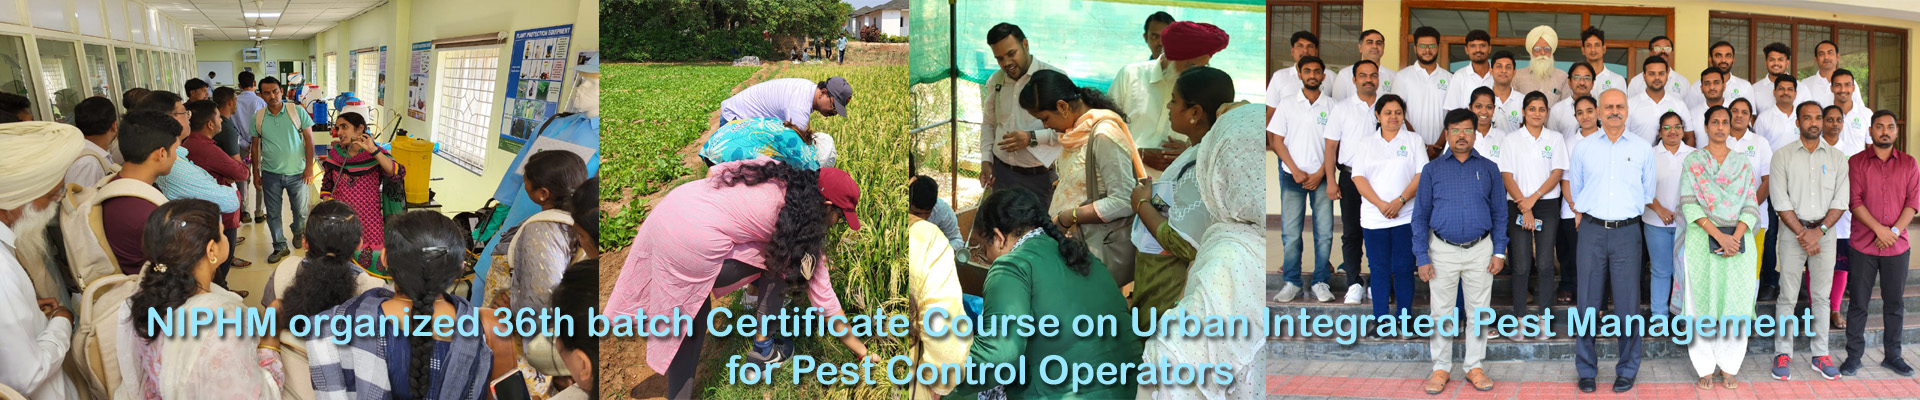 NIPHM organized 36th batch Certificate Course on Urban Integrated Pest Management for Pest Control Operators